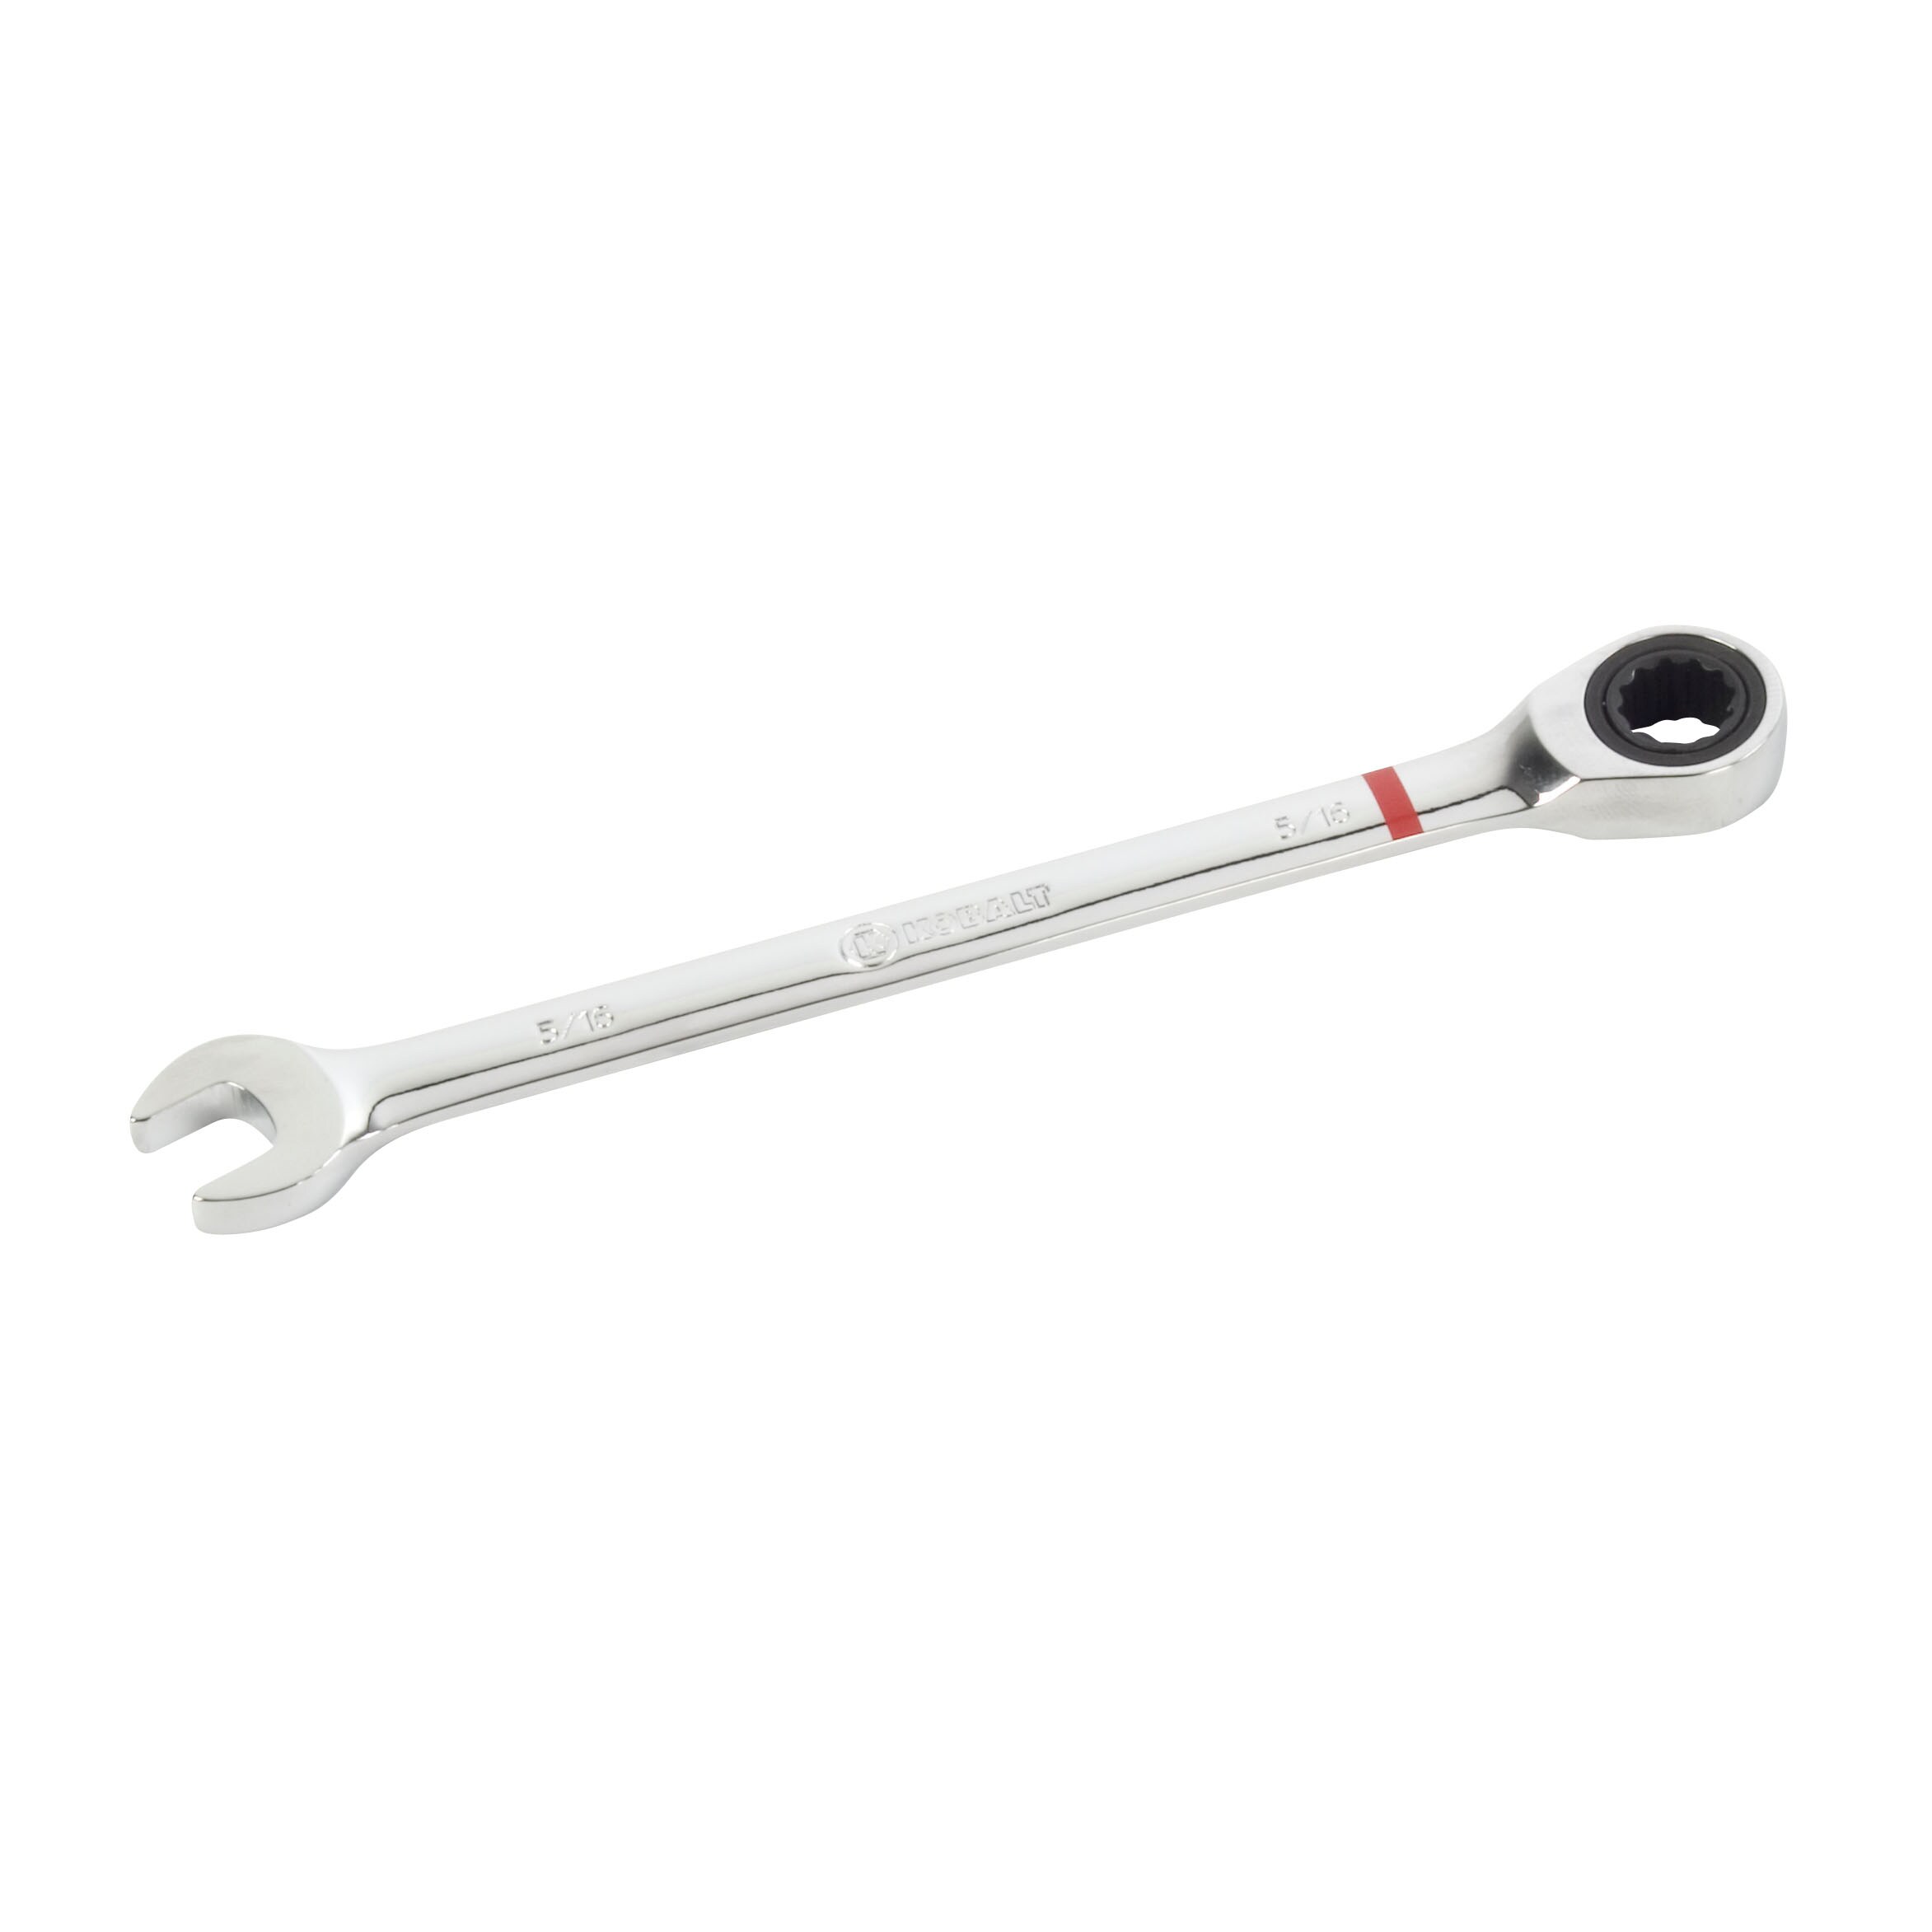 AUTOMATIC RELEASE STEEL BAND HOSE CLAMP T-HANDLE RATCHETING TORQUE WRENCH 5/16 